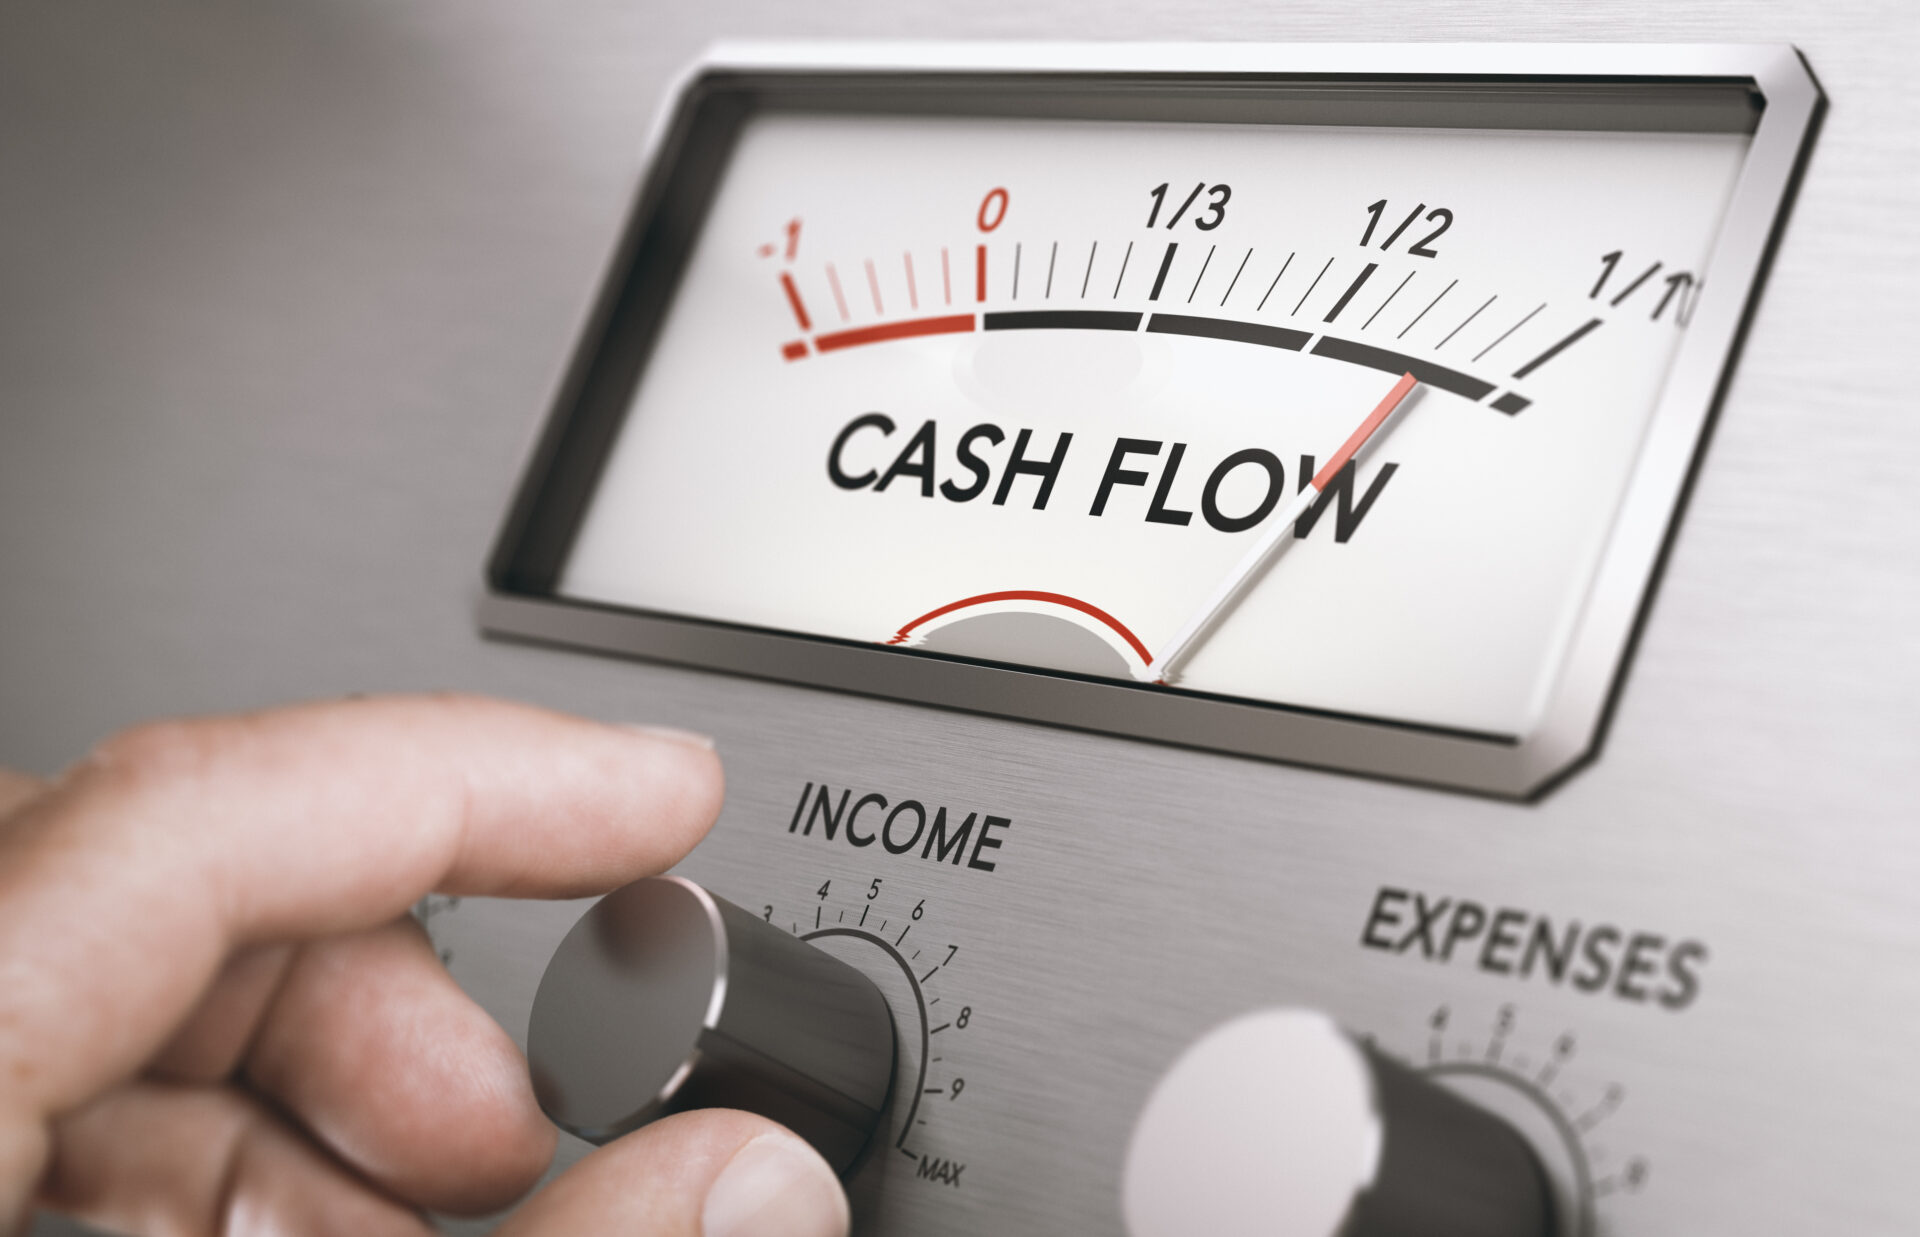 Common Strategies to Avoid a Cash Flow Crisis